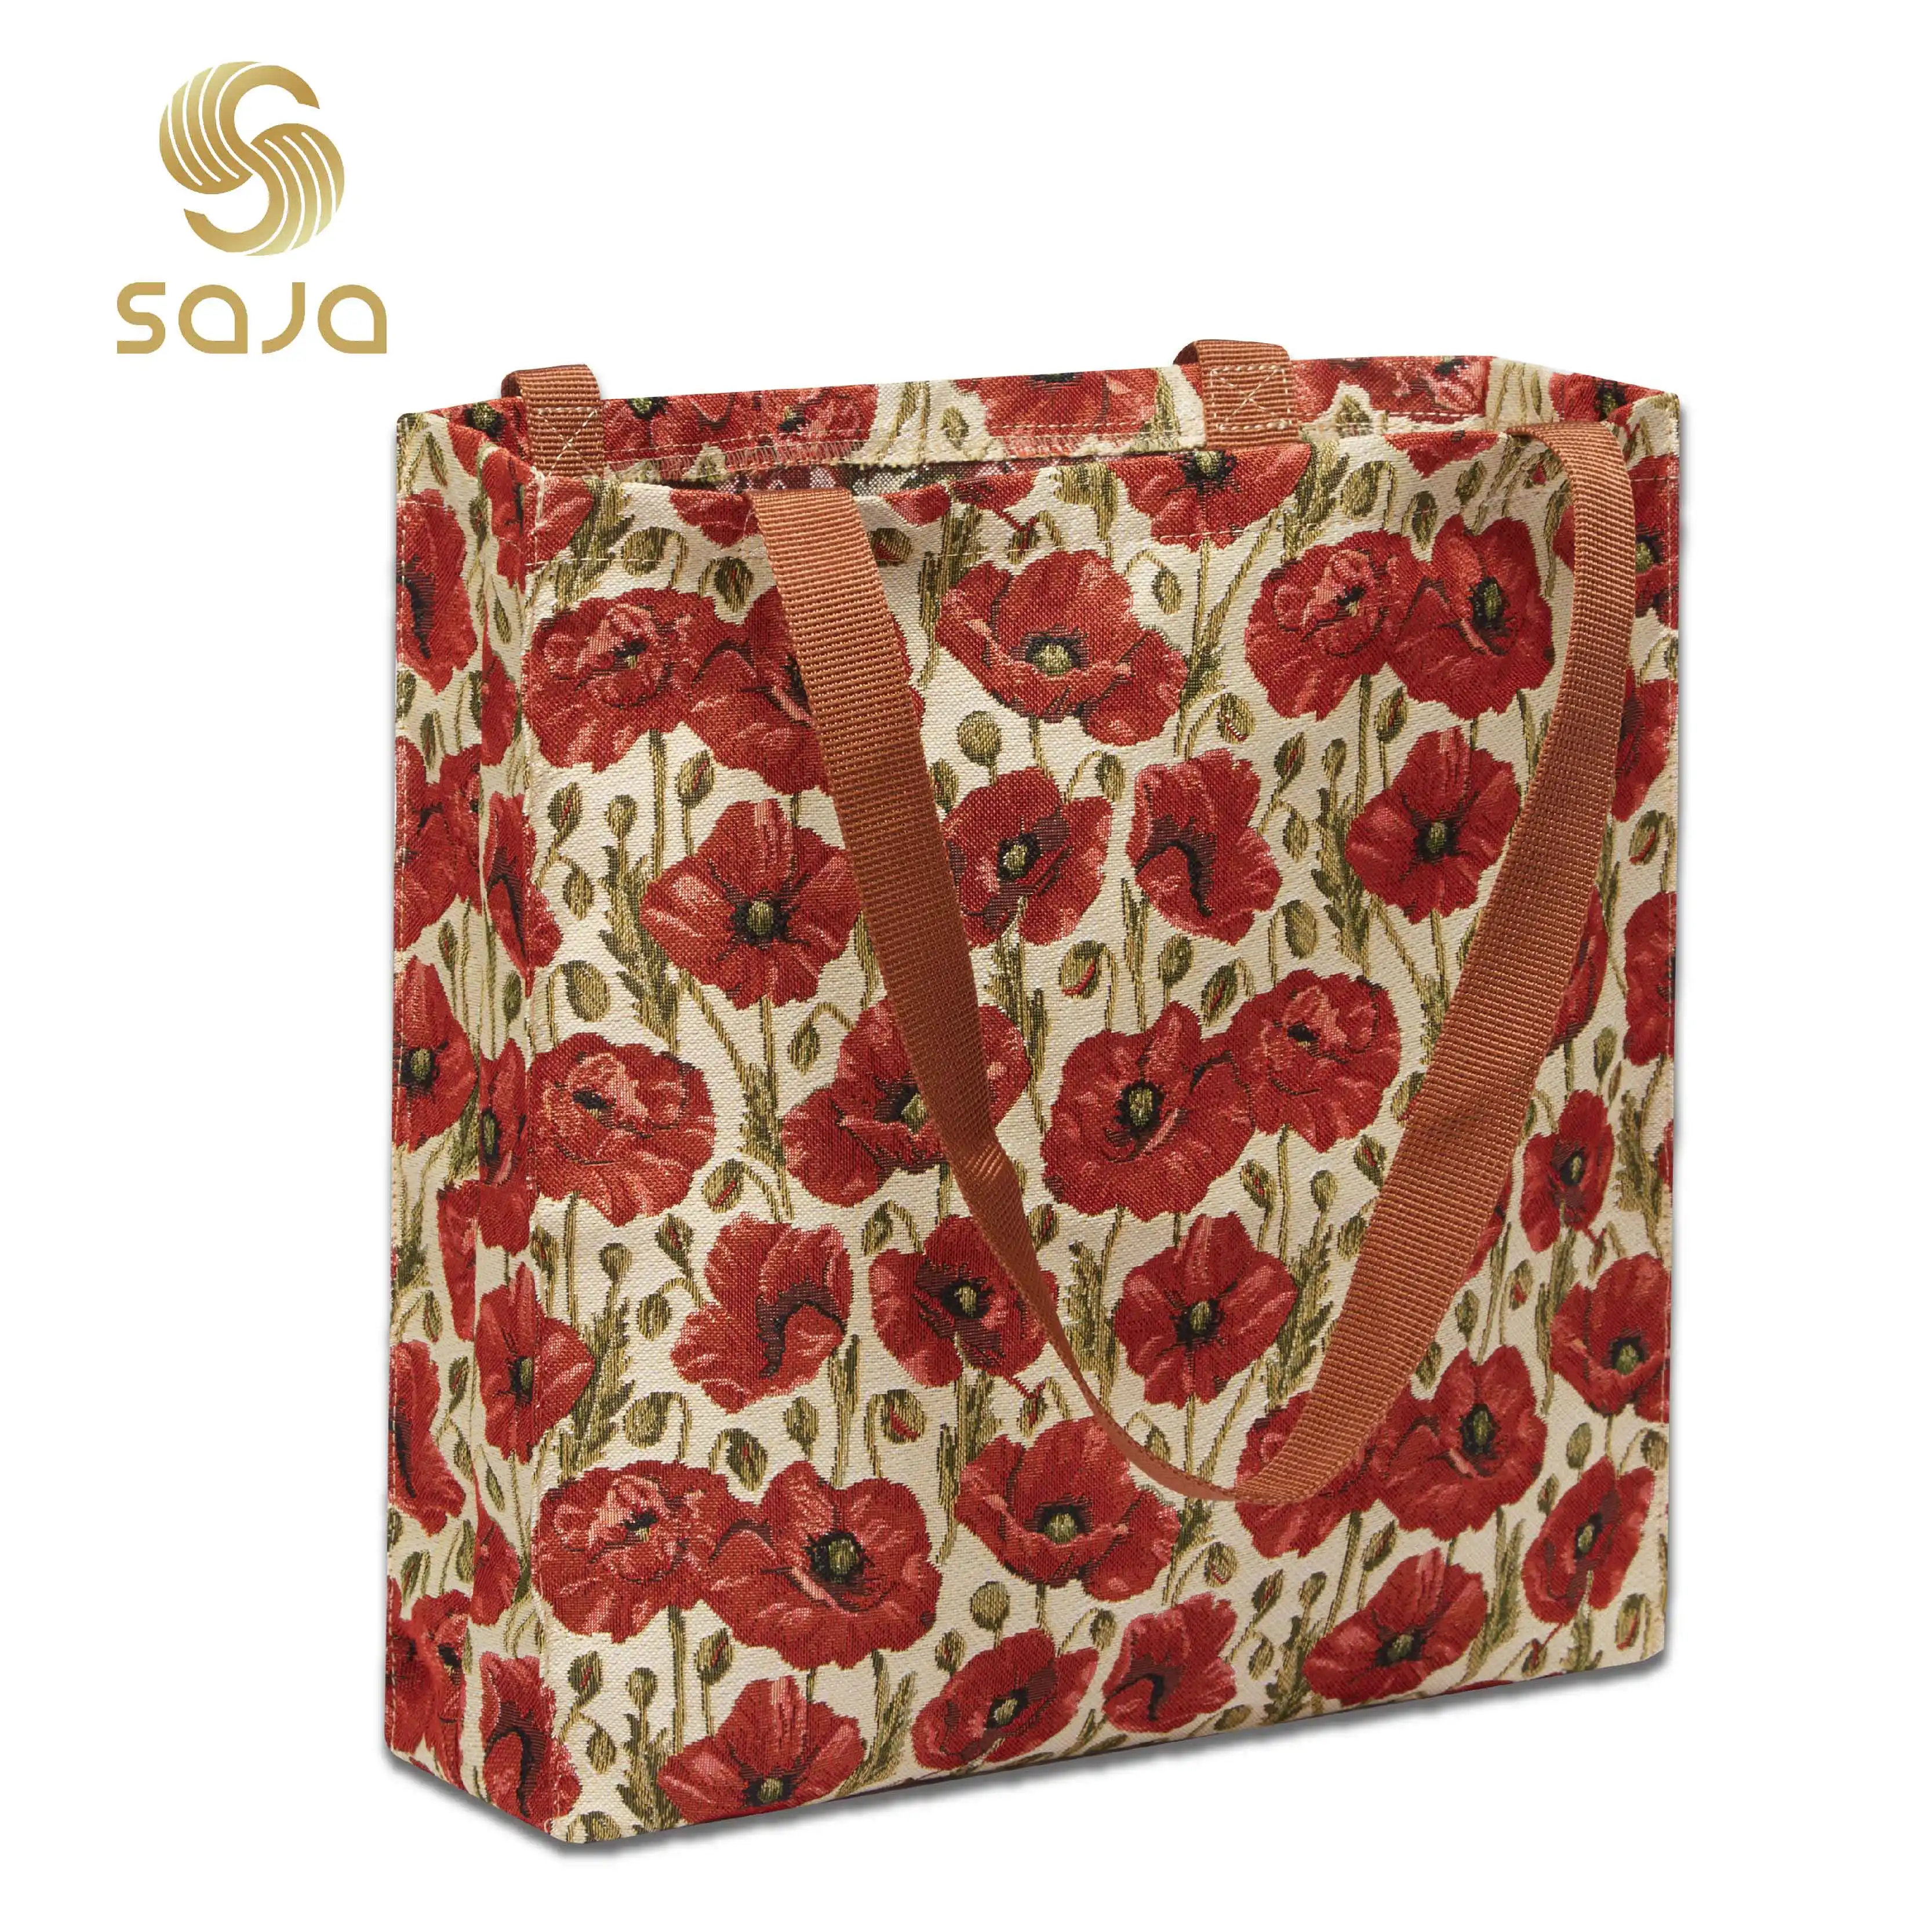 SAJA Foldable Shopping Bag Large Capacity Tote Bag Woman's Shoulder Bags Poppy Flower Female Gril Beach Grocery Bag for Travel